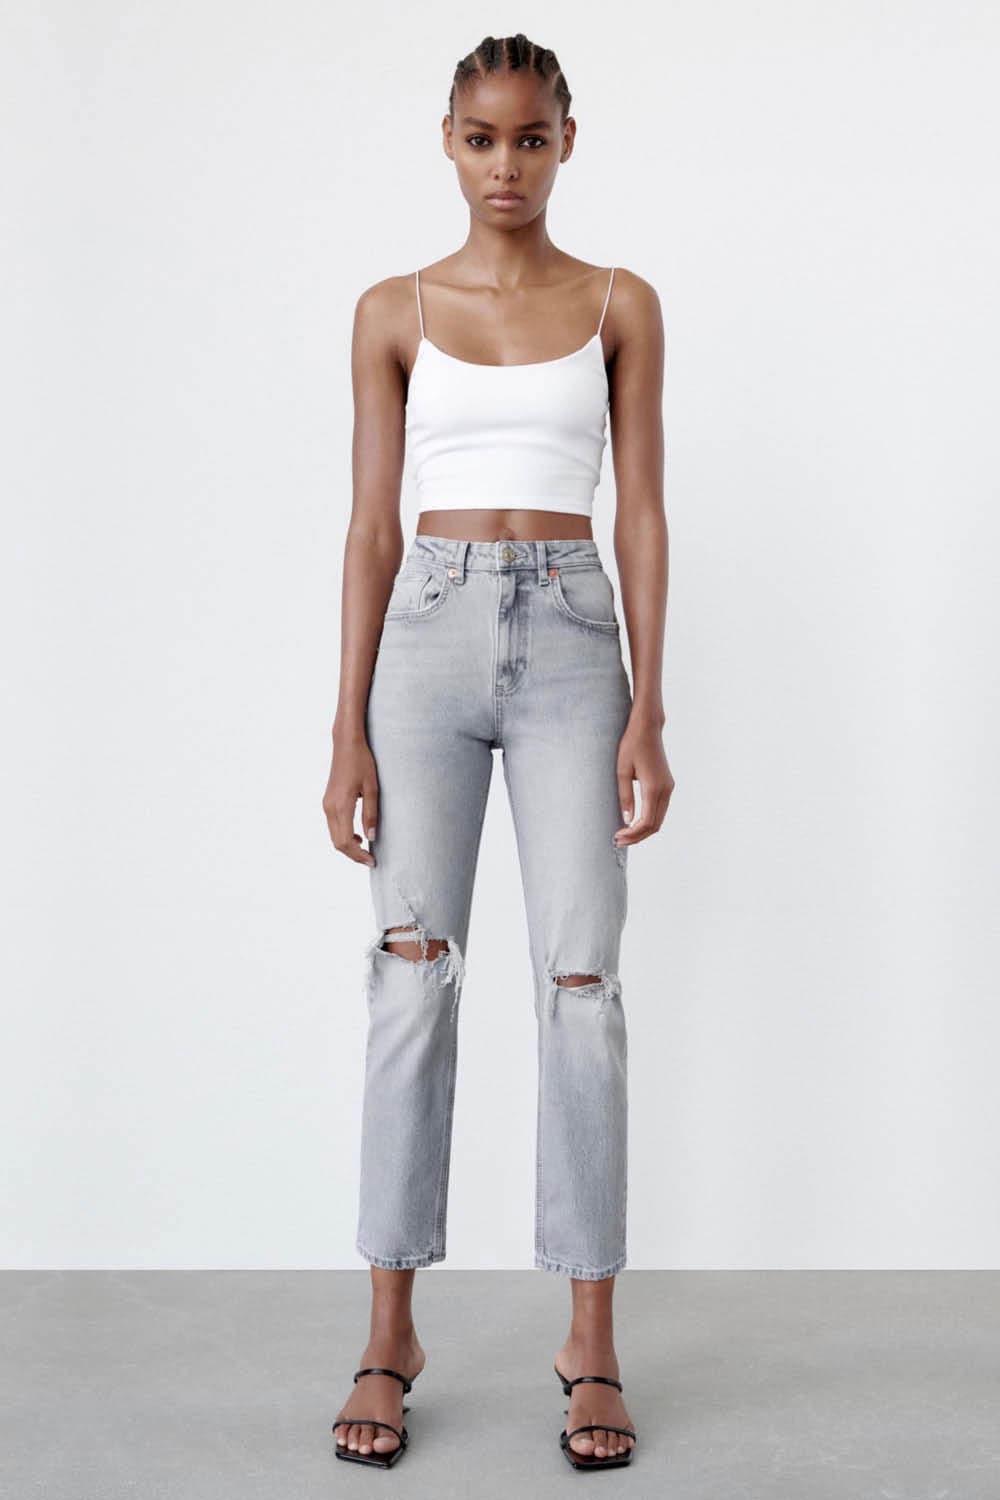 Find the trending styles in denim jeans